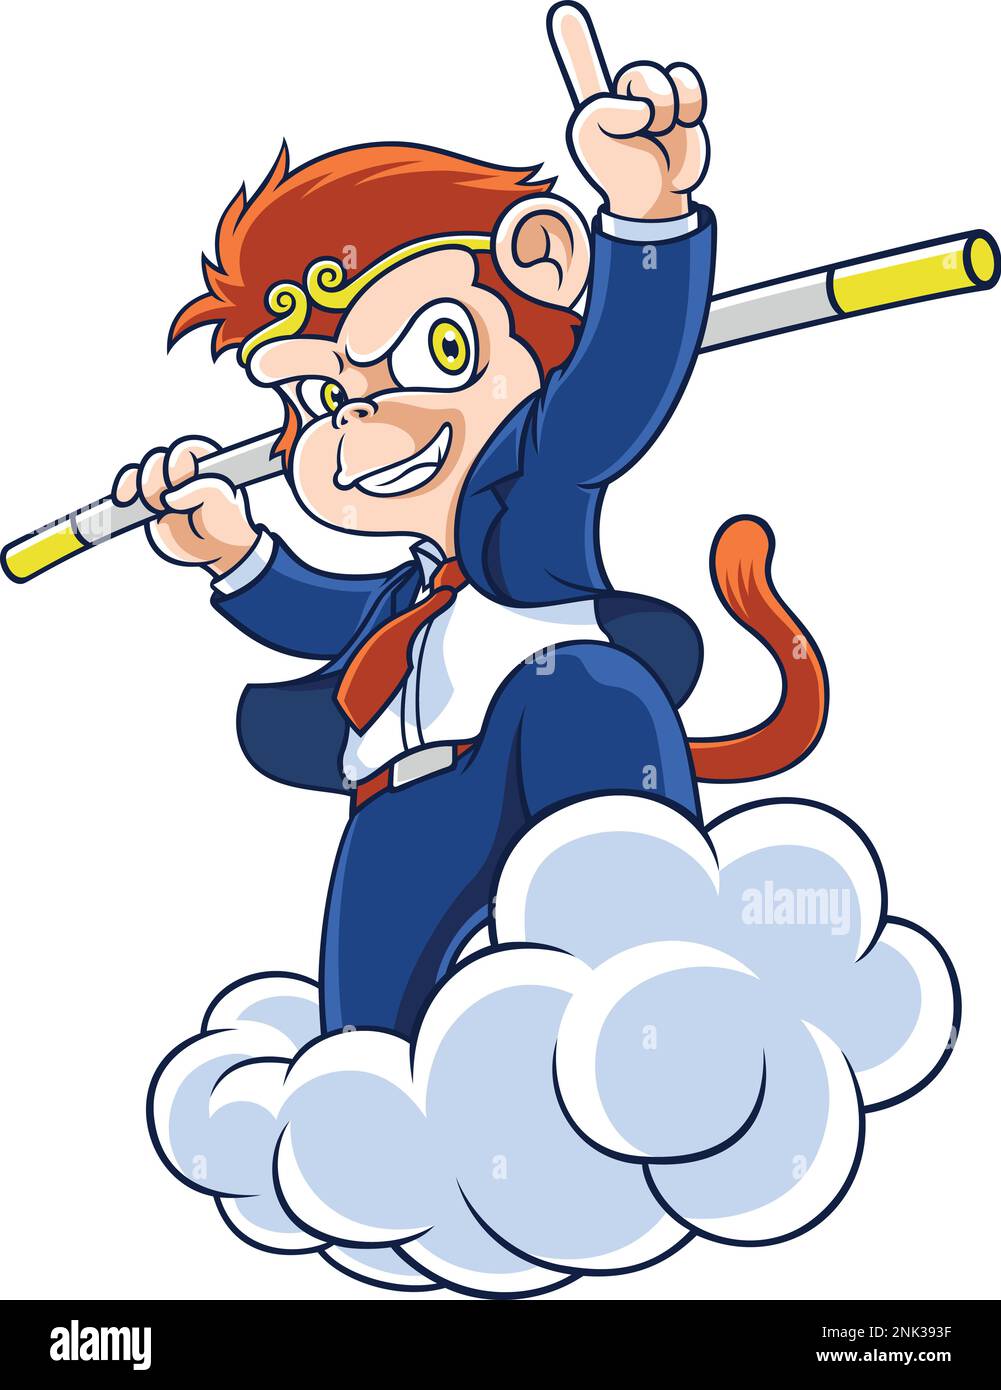 Monkey King in Suits Flying with a Magical Cloud Stock Vector